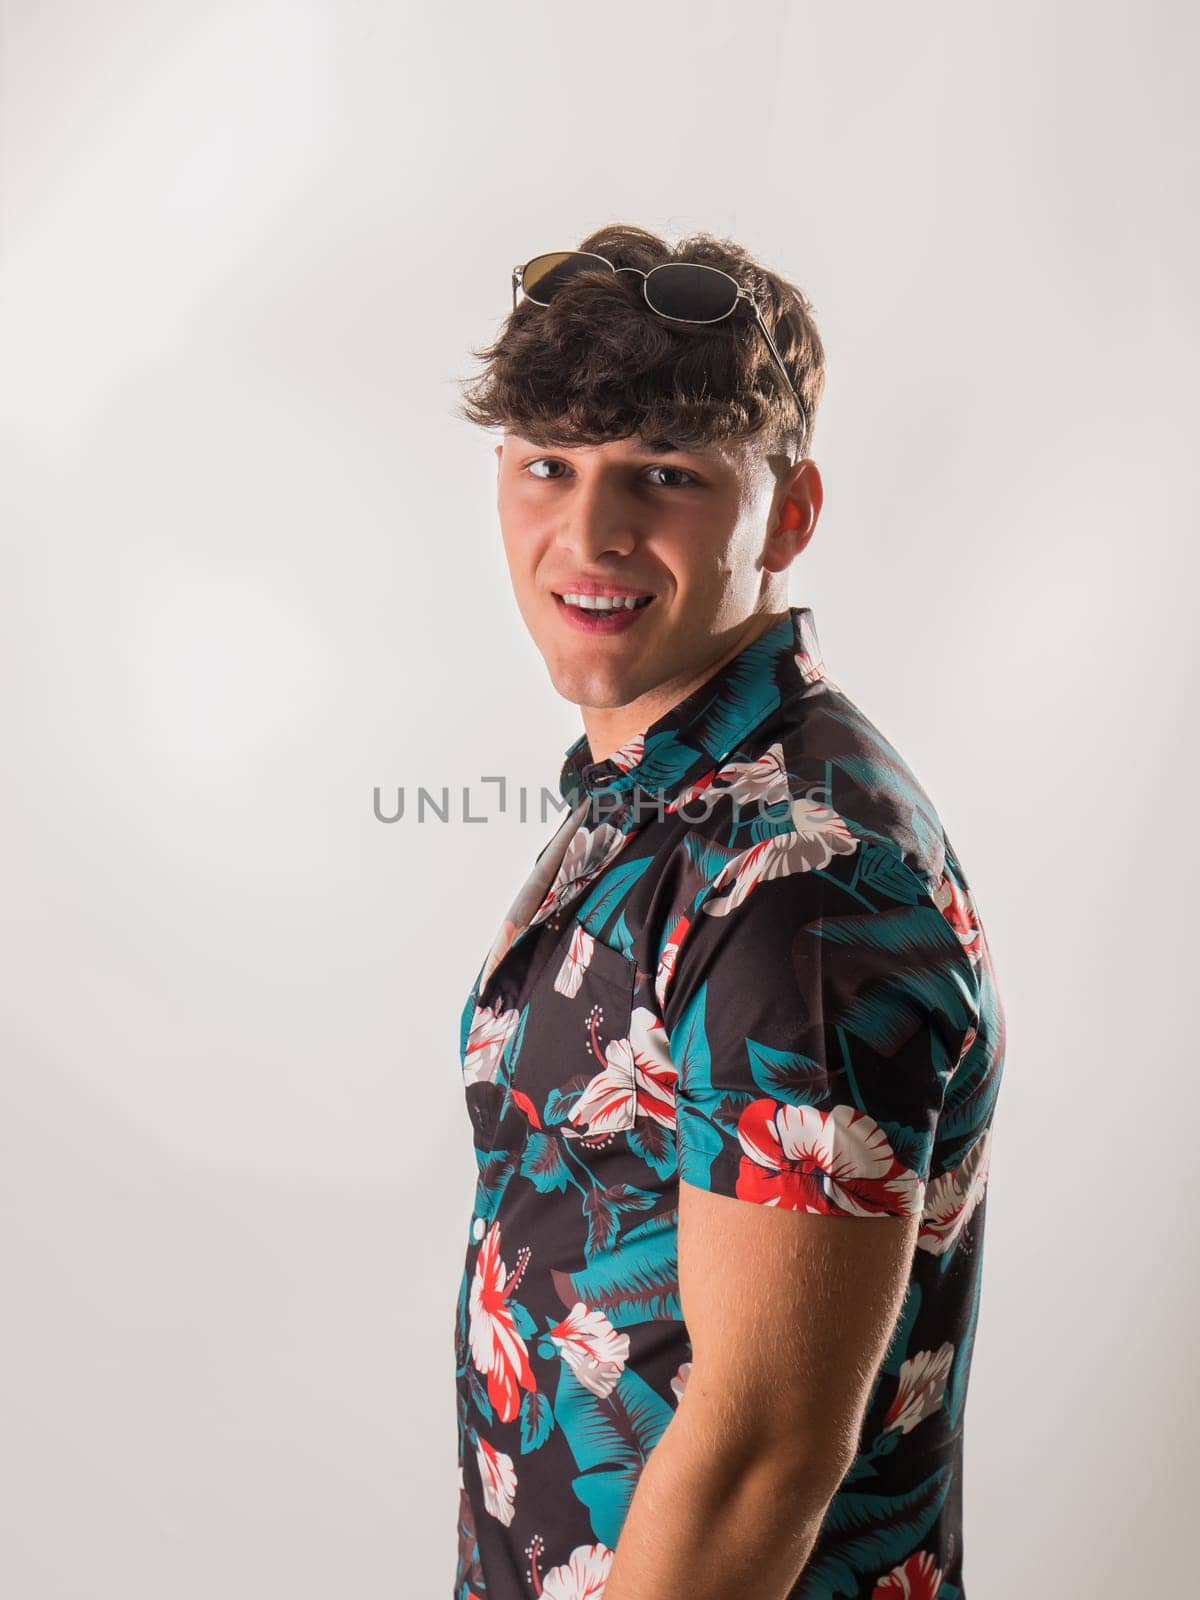 Attractive, muscular young man smiling, wearing open hawaian style shirt on white background